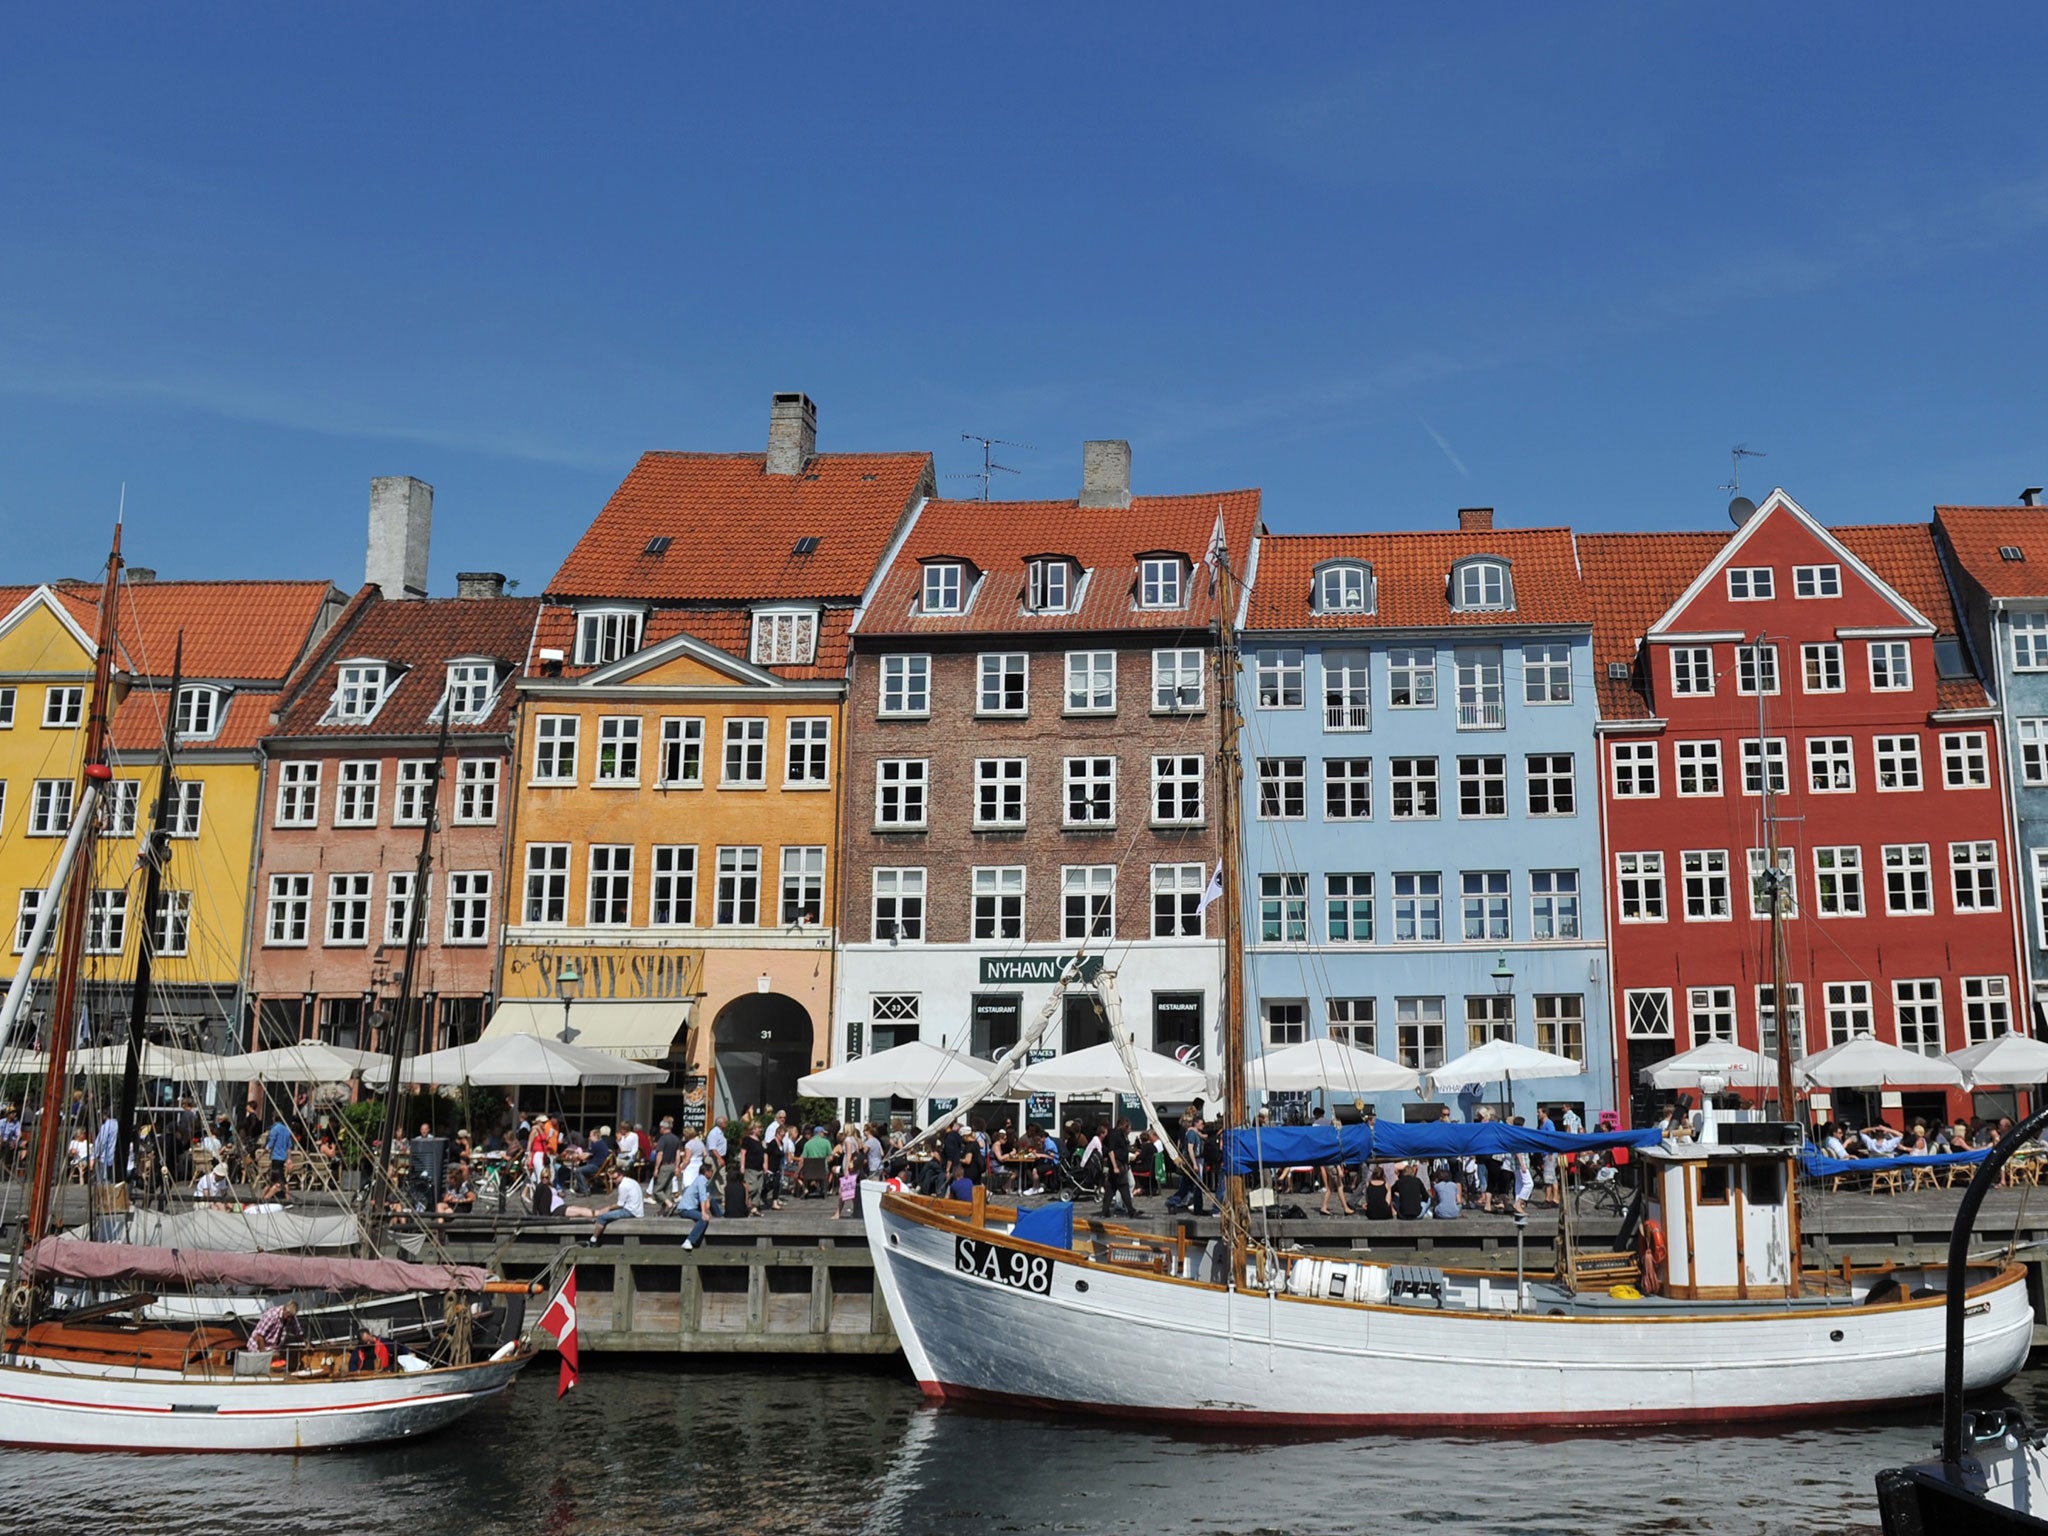 Coulourful houses and boats seen in the Nyhavn district in Copenhagen